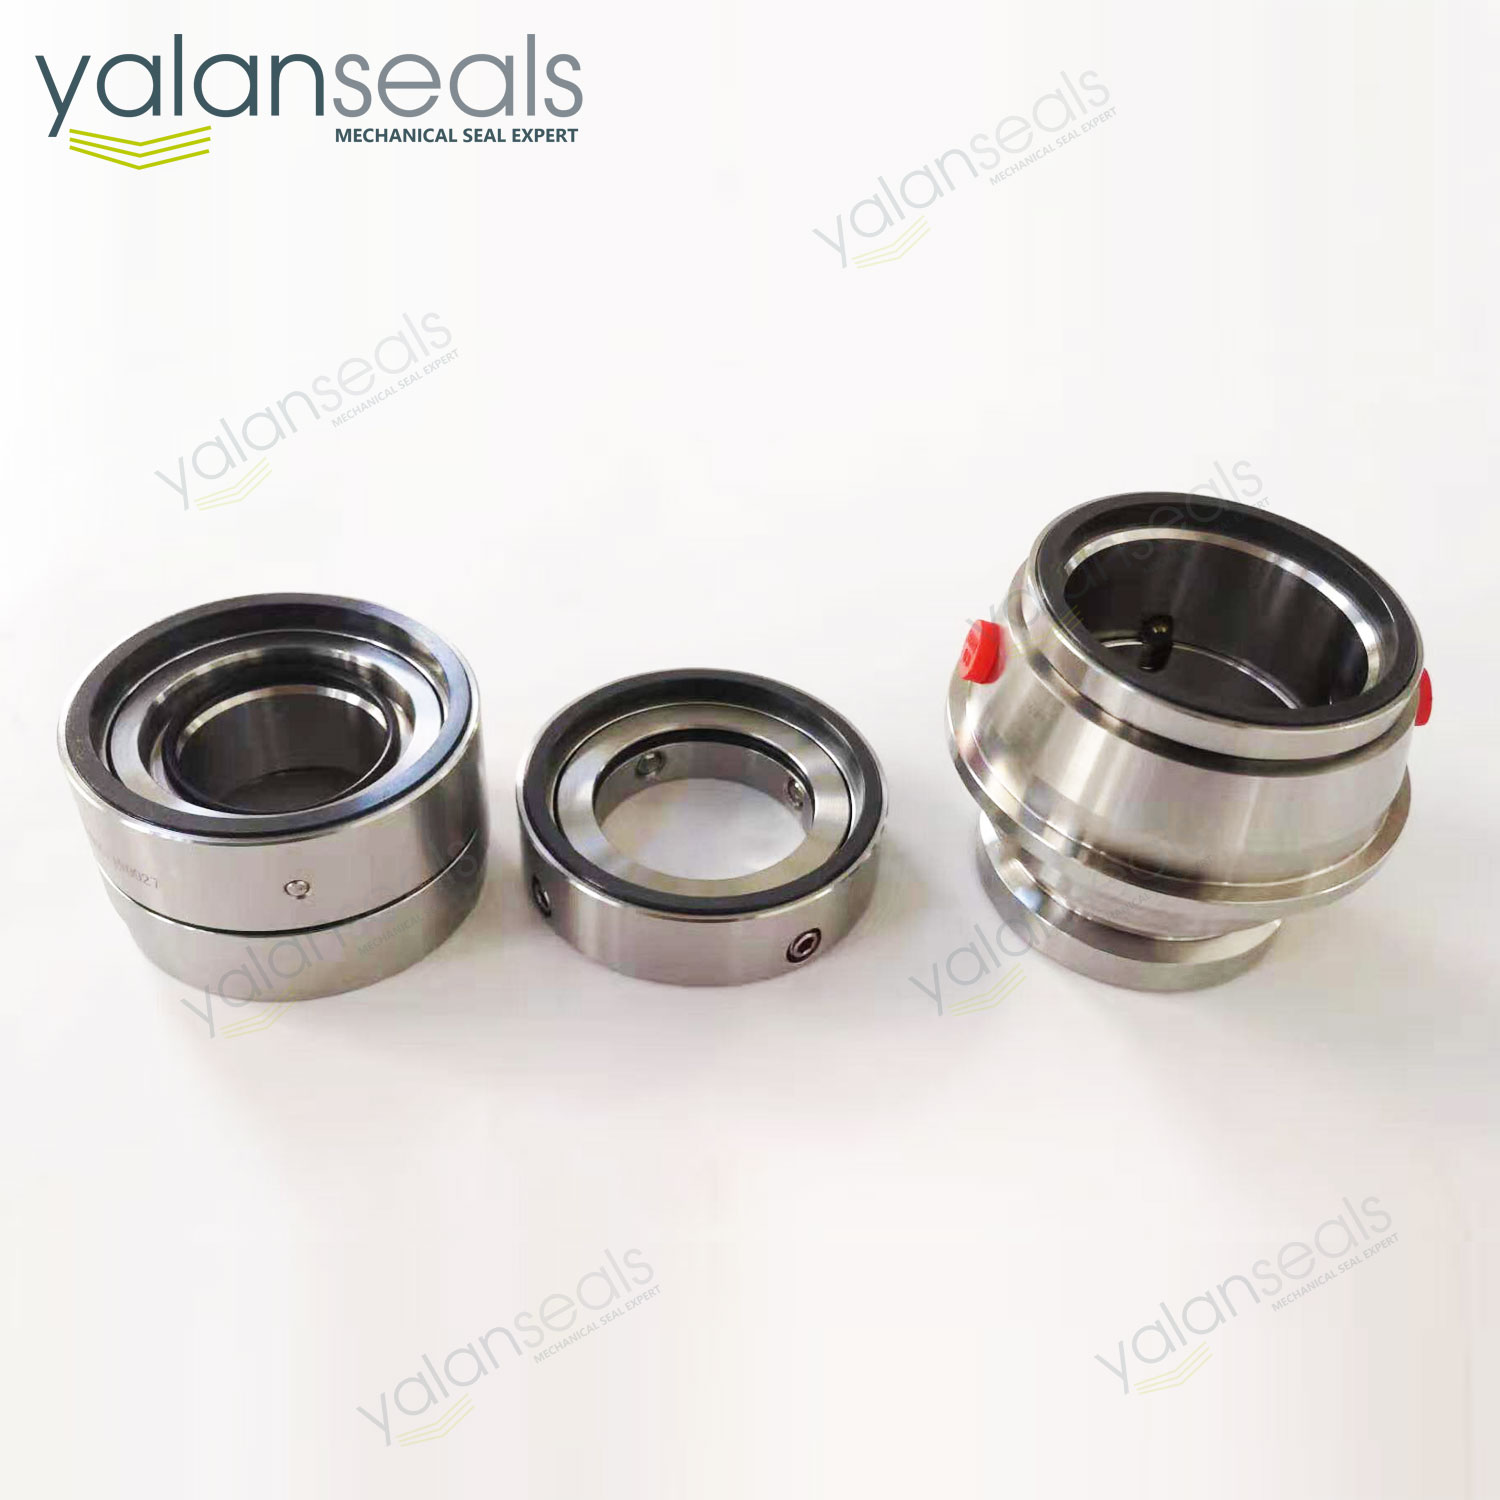 YALAN TB1, TB1F and TB2 Ready-fitted Mechanical Seals for AHLSTAR Pumps